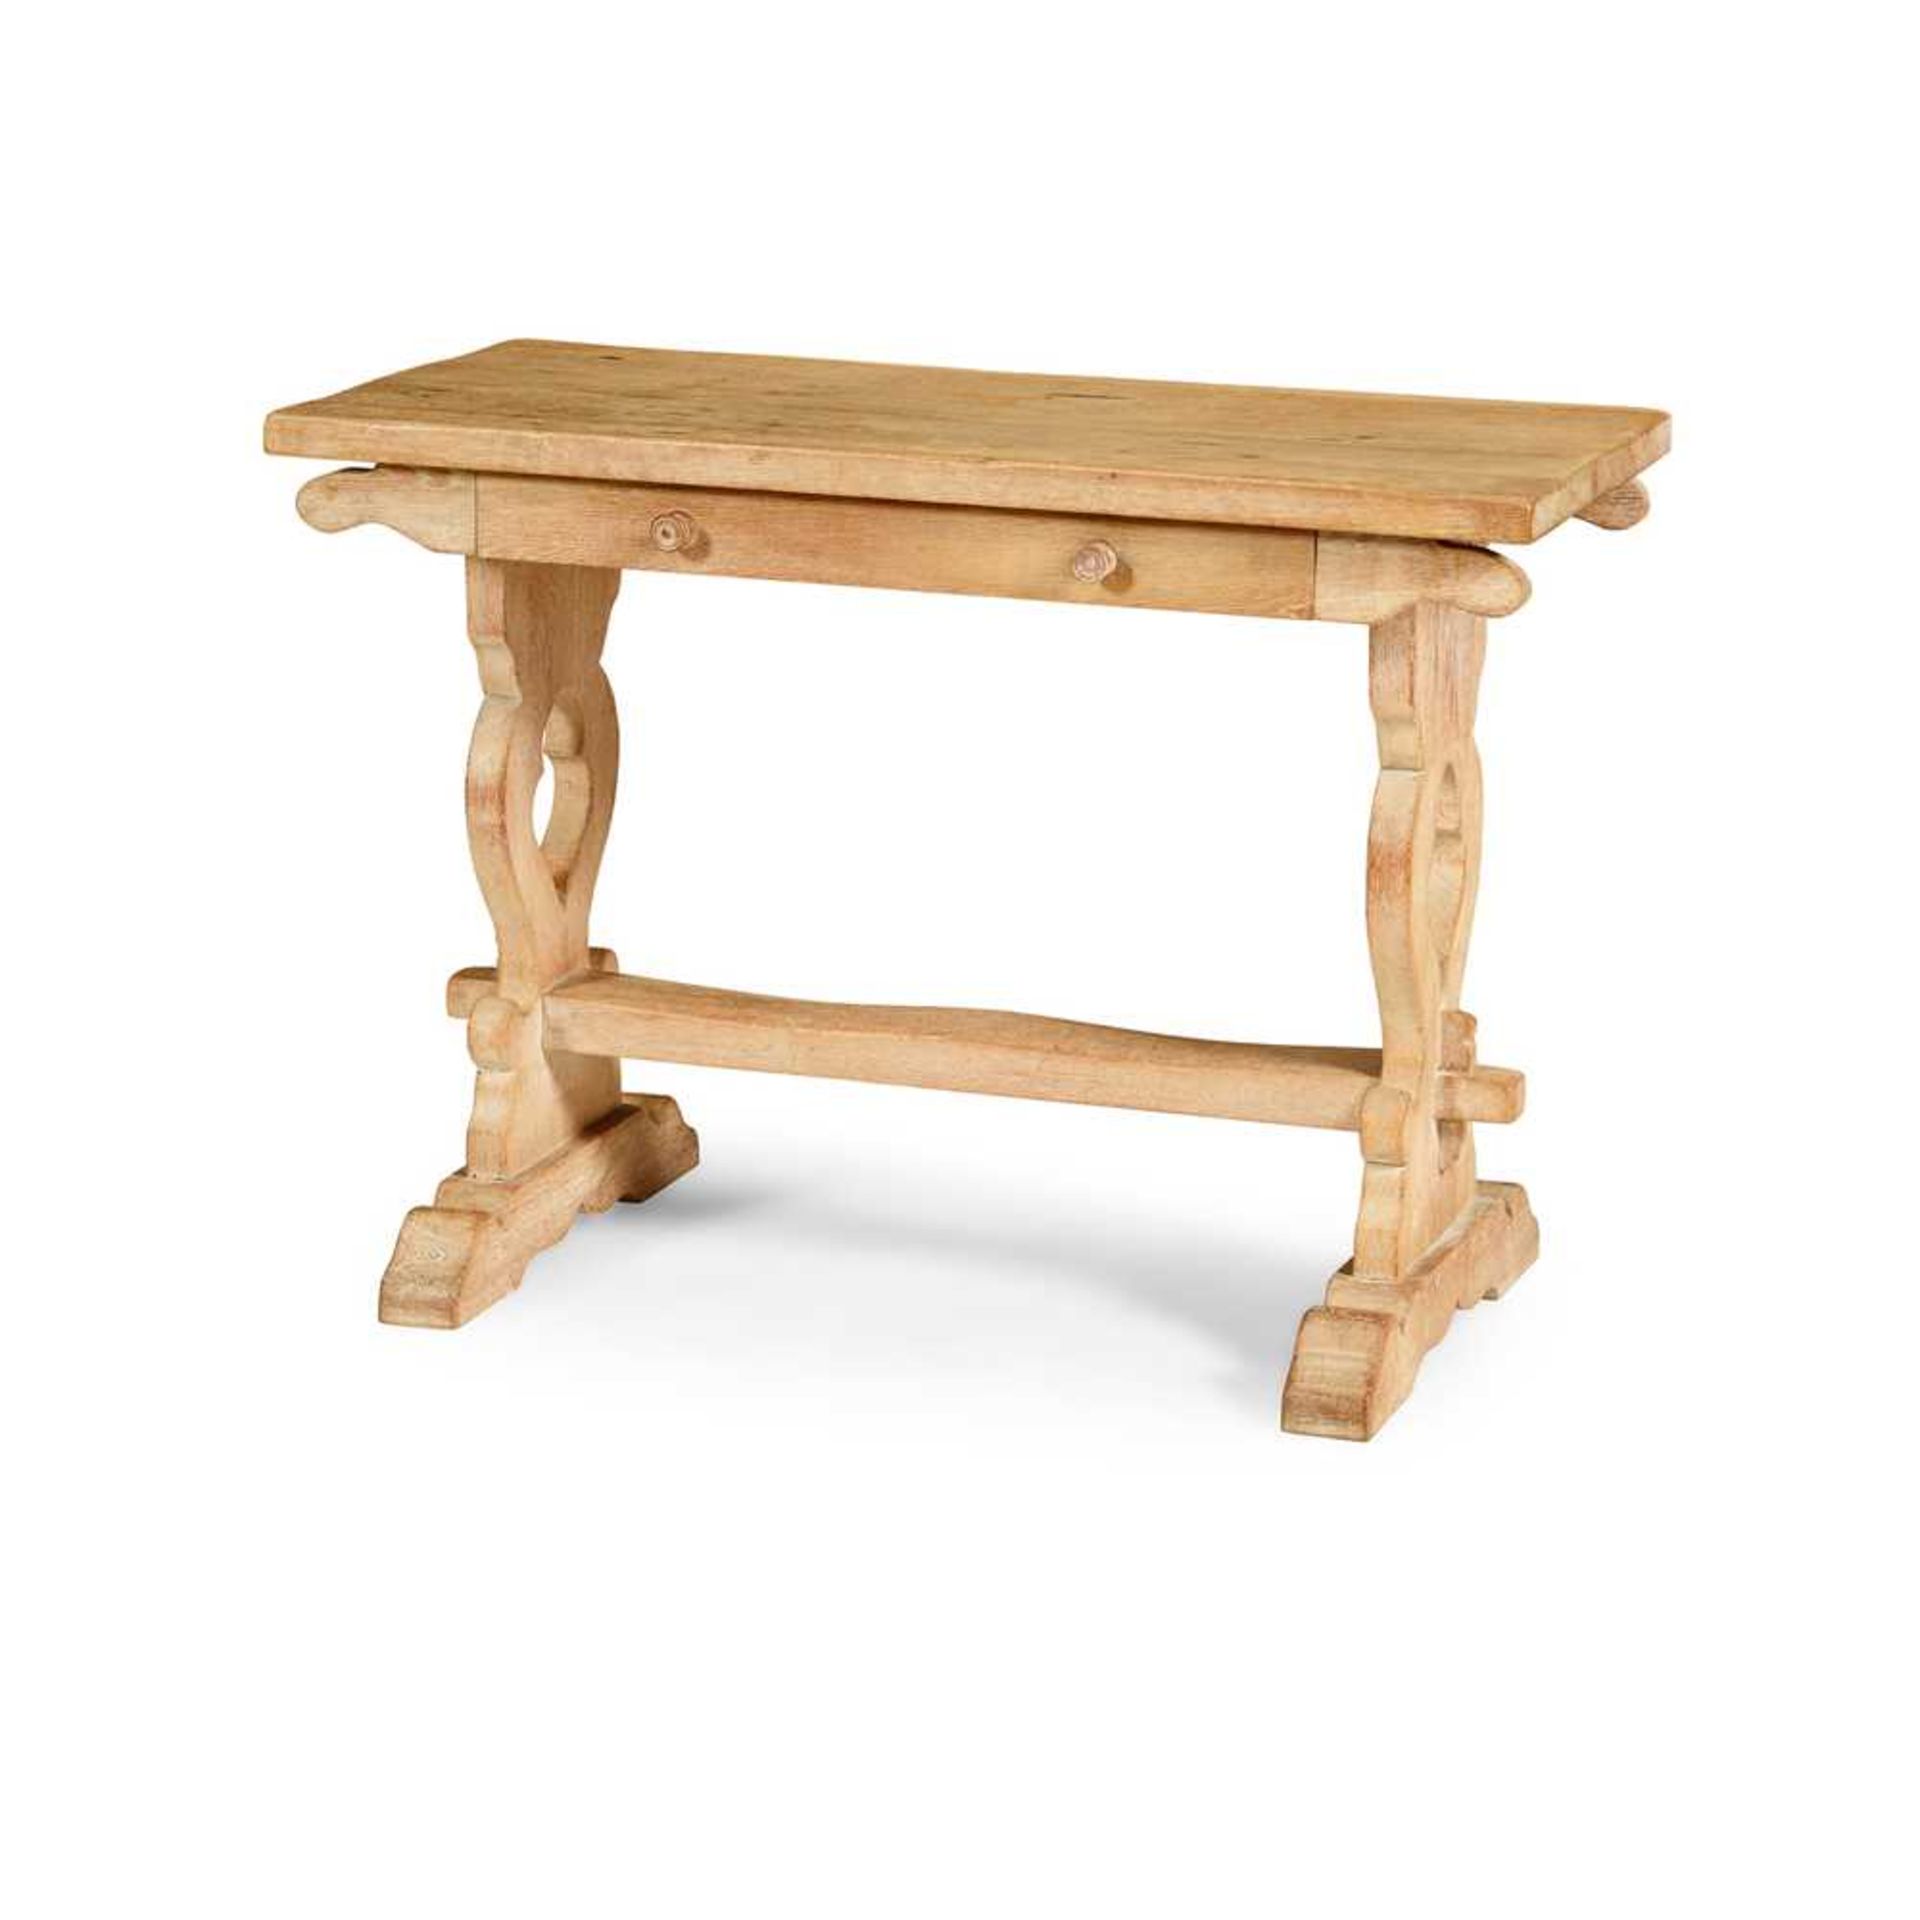 A LIMED OAK TRESTLE TABLE IN THE MANNER OF SIR ROBERT LORIMER EARLY 20TH CENTURY